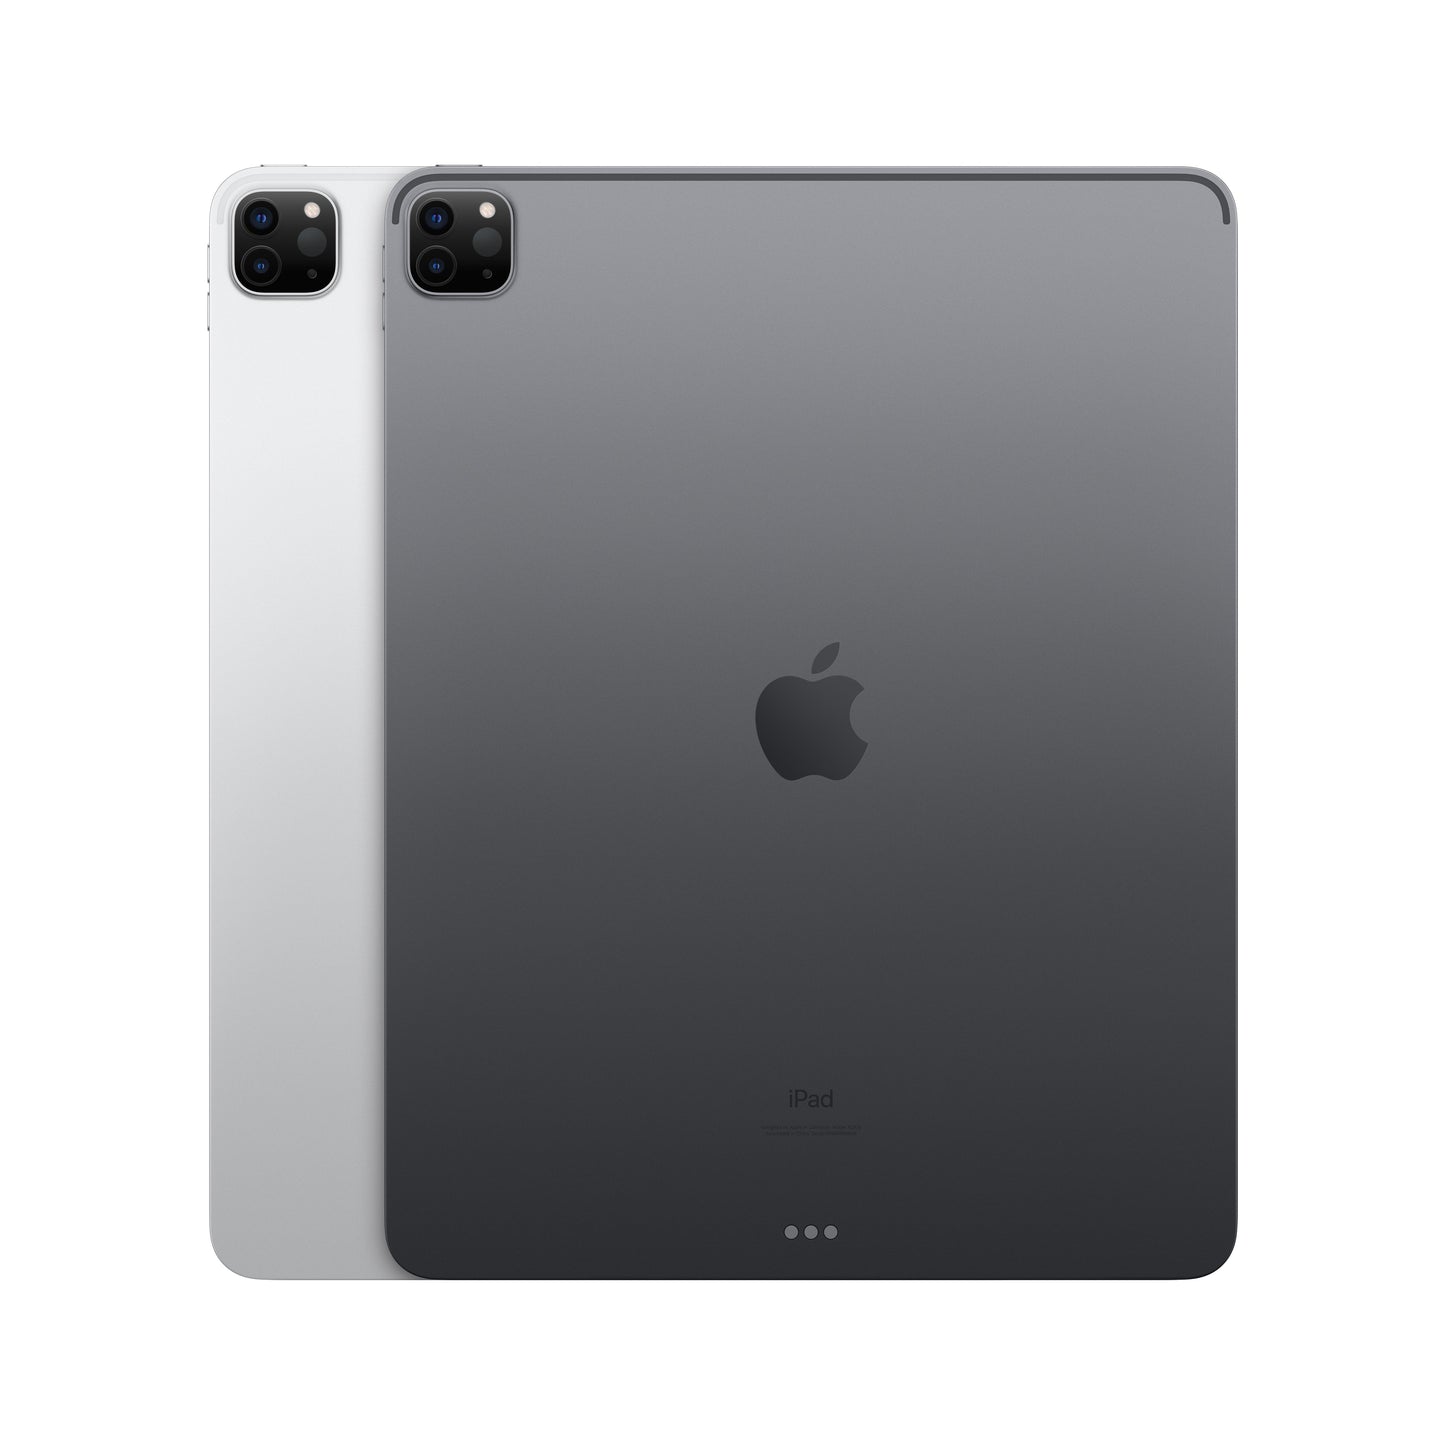 iPad Pro 12.9-inch (with Apple M1) - Wi-Fi + Cellular